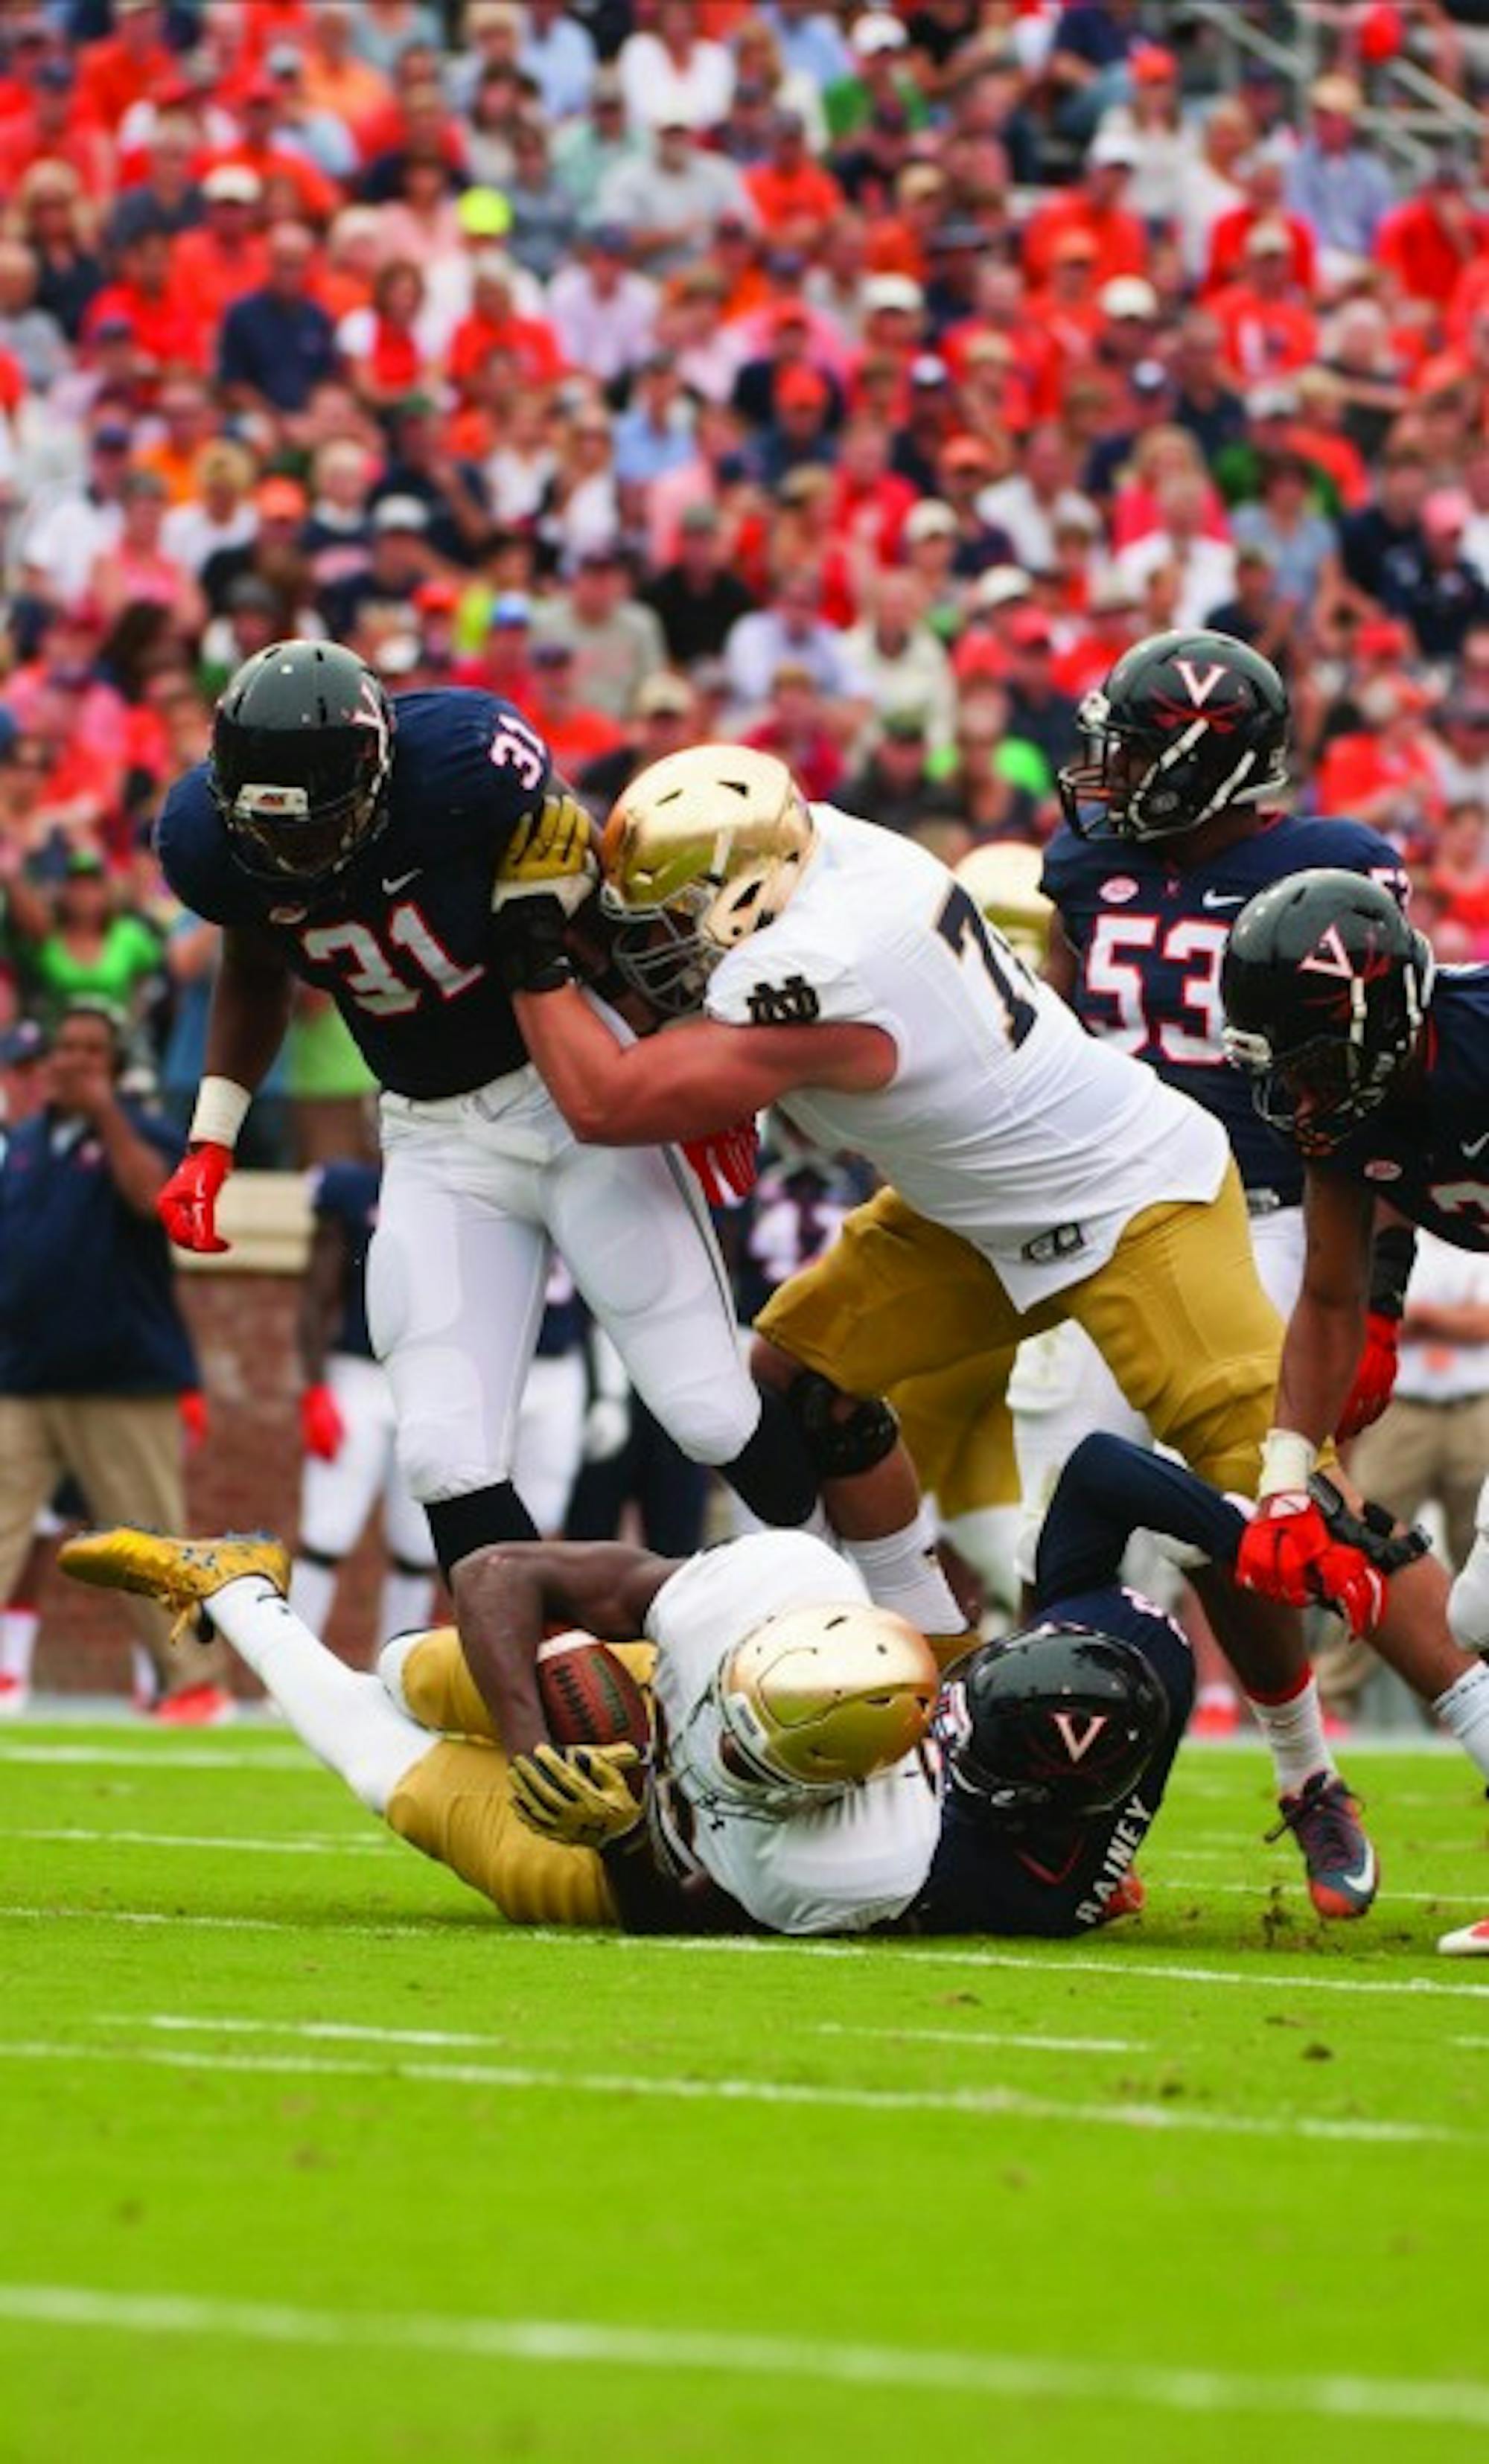 Irish graduate student offensive lineman Nick Martin makes a block during Notre Dame’s 34-27 win over Virginia on Sept. 12.